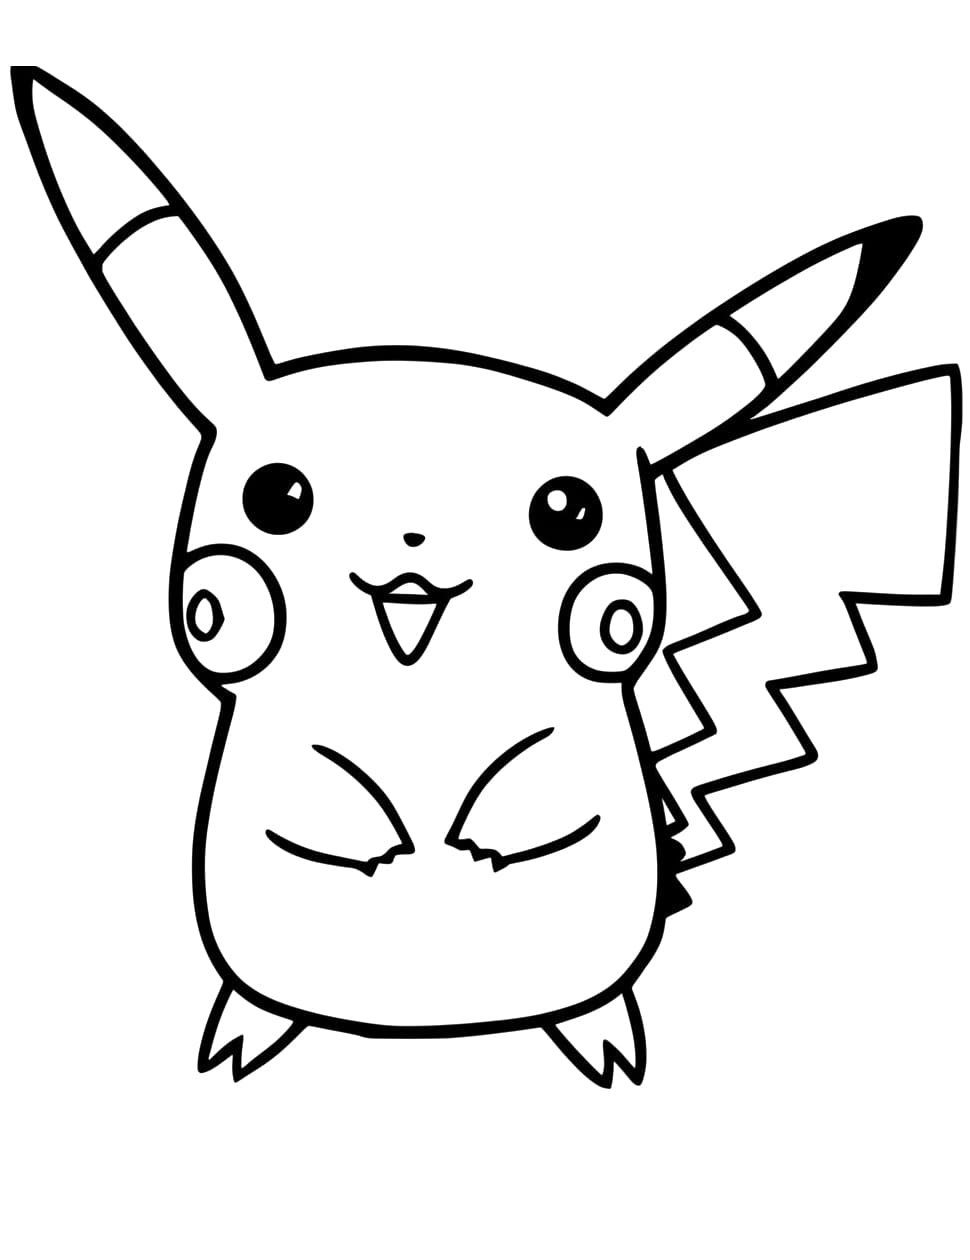 Pikachu coloring pages